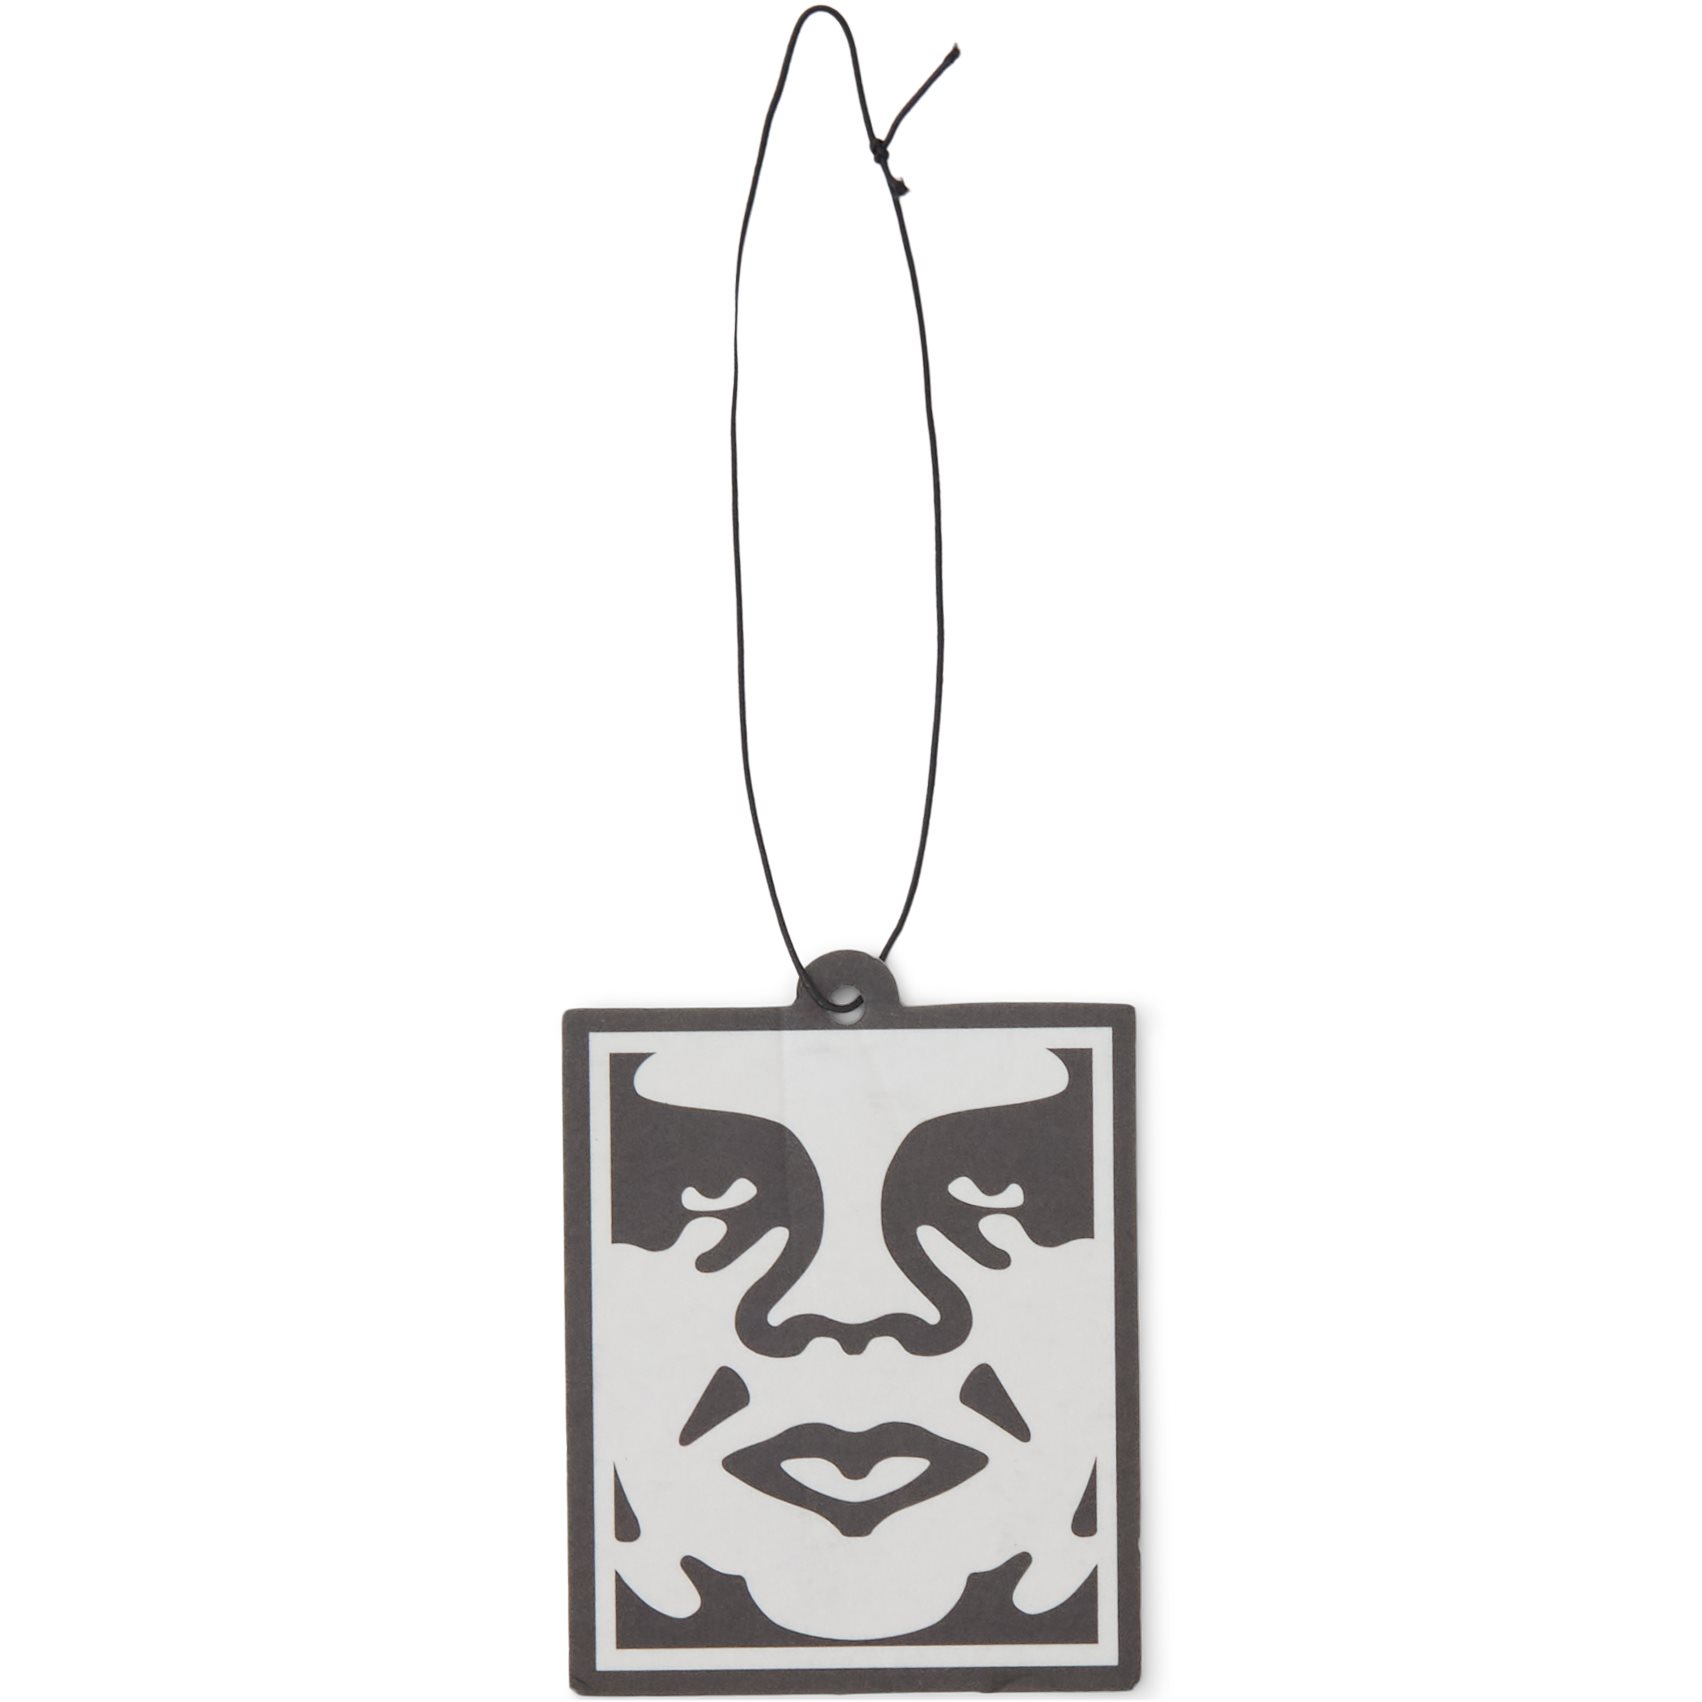 Obey Accessories OBEY ICON AIR FRESHENER 100680003 Black